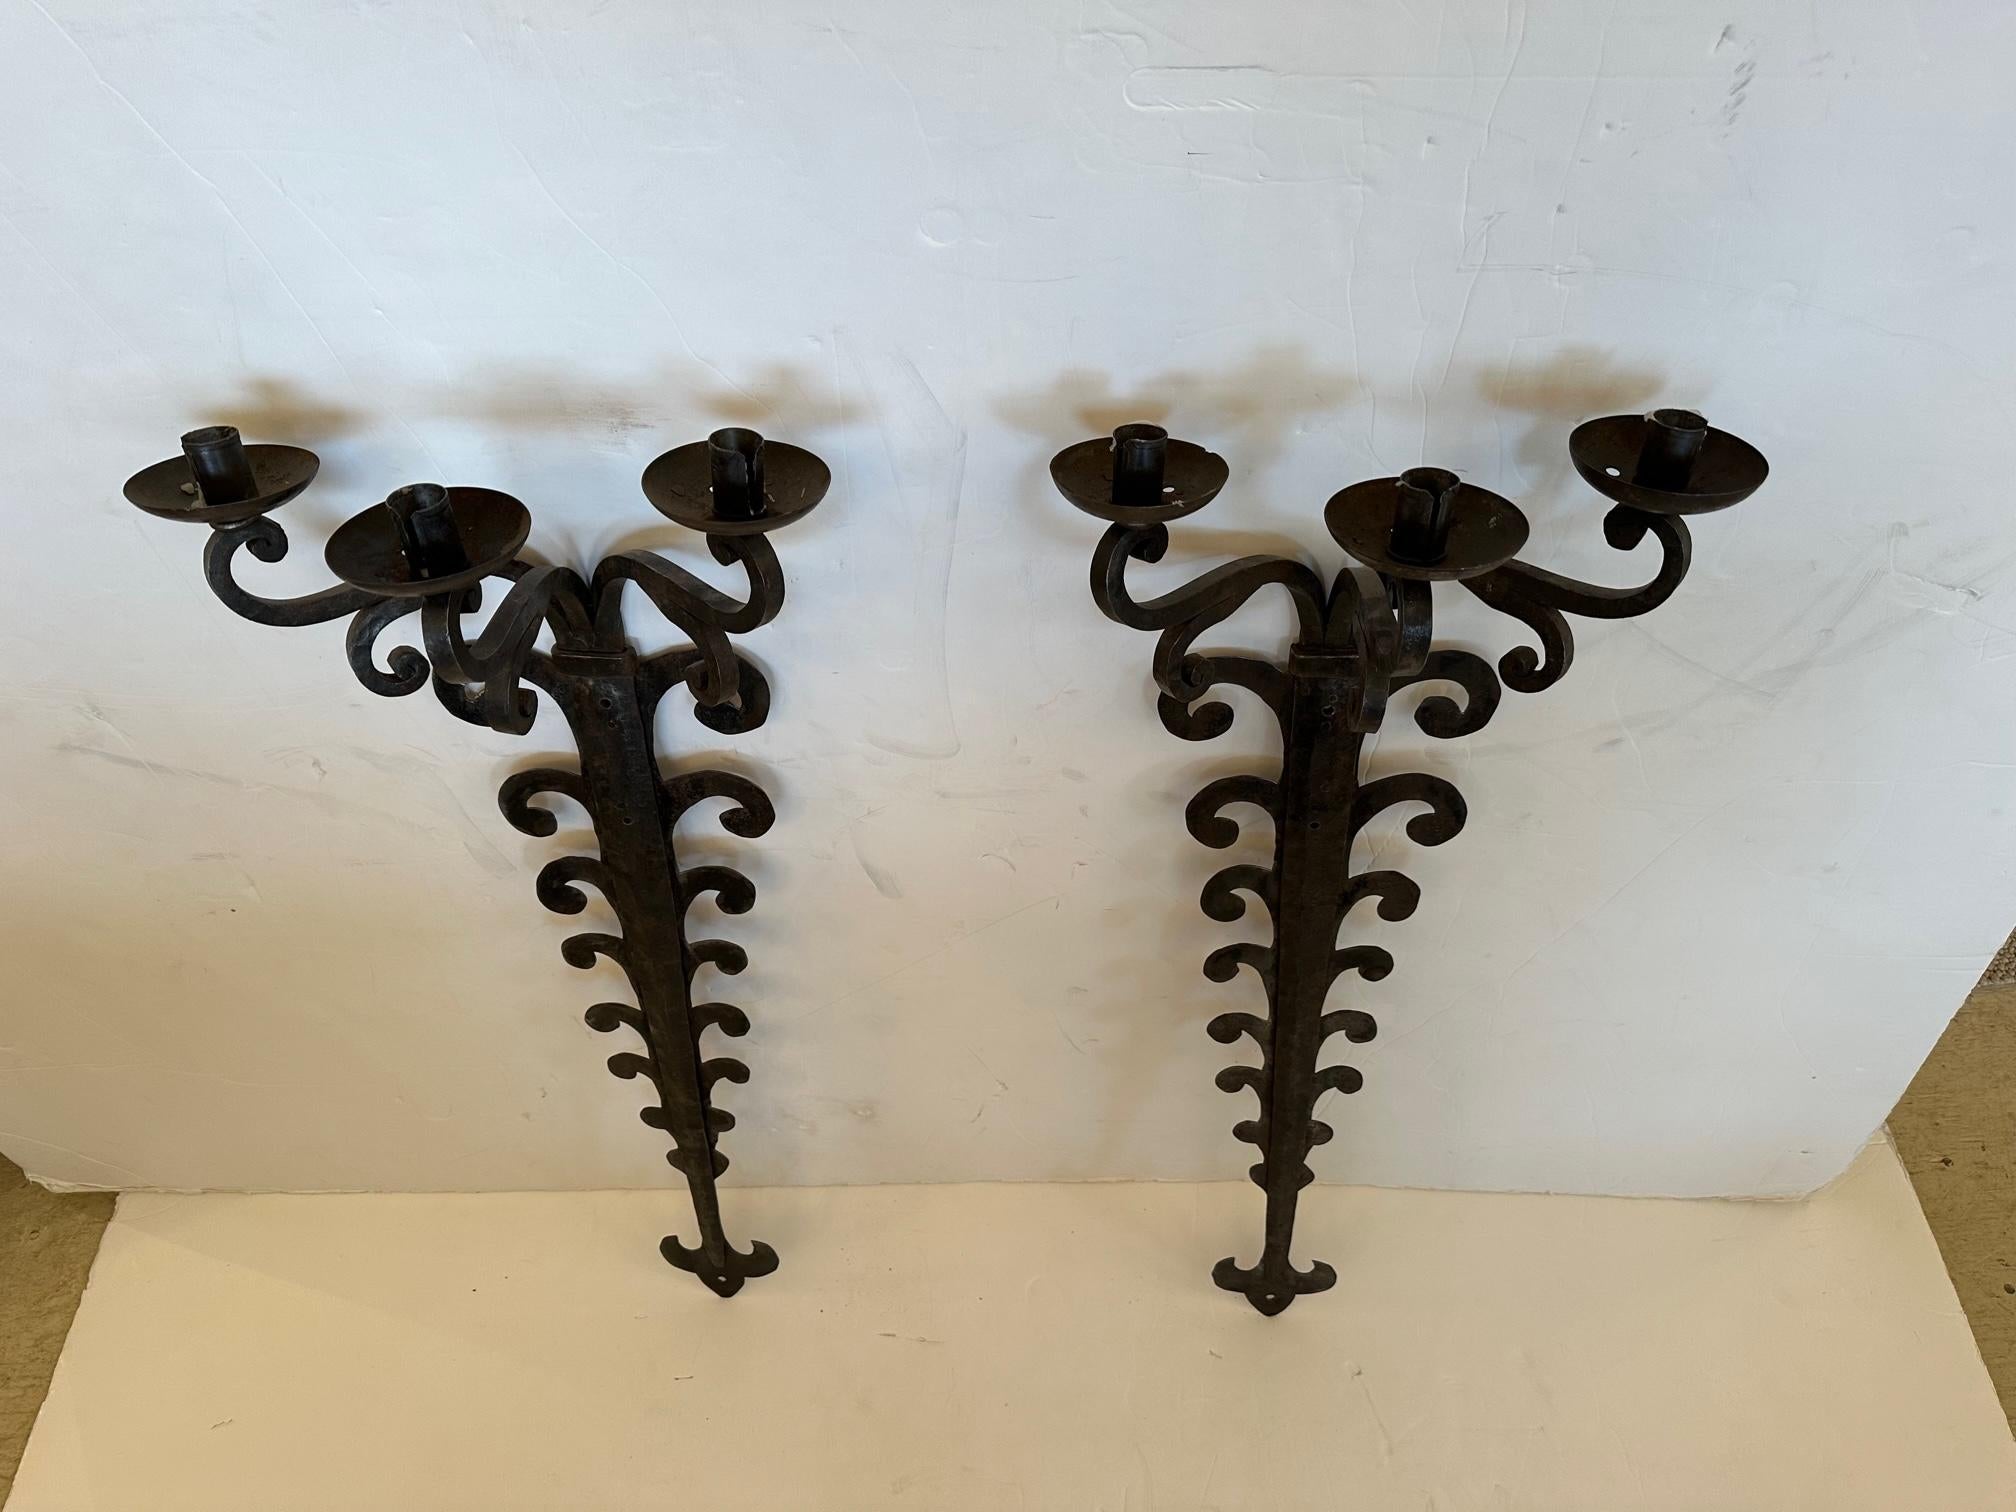 Pair of impressively large hand forged sconces of iron and tole having 3 arms each for candles.  Could be electrified.

